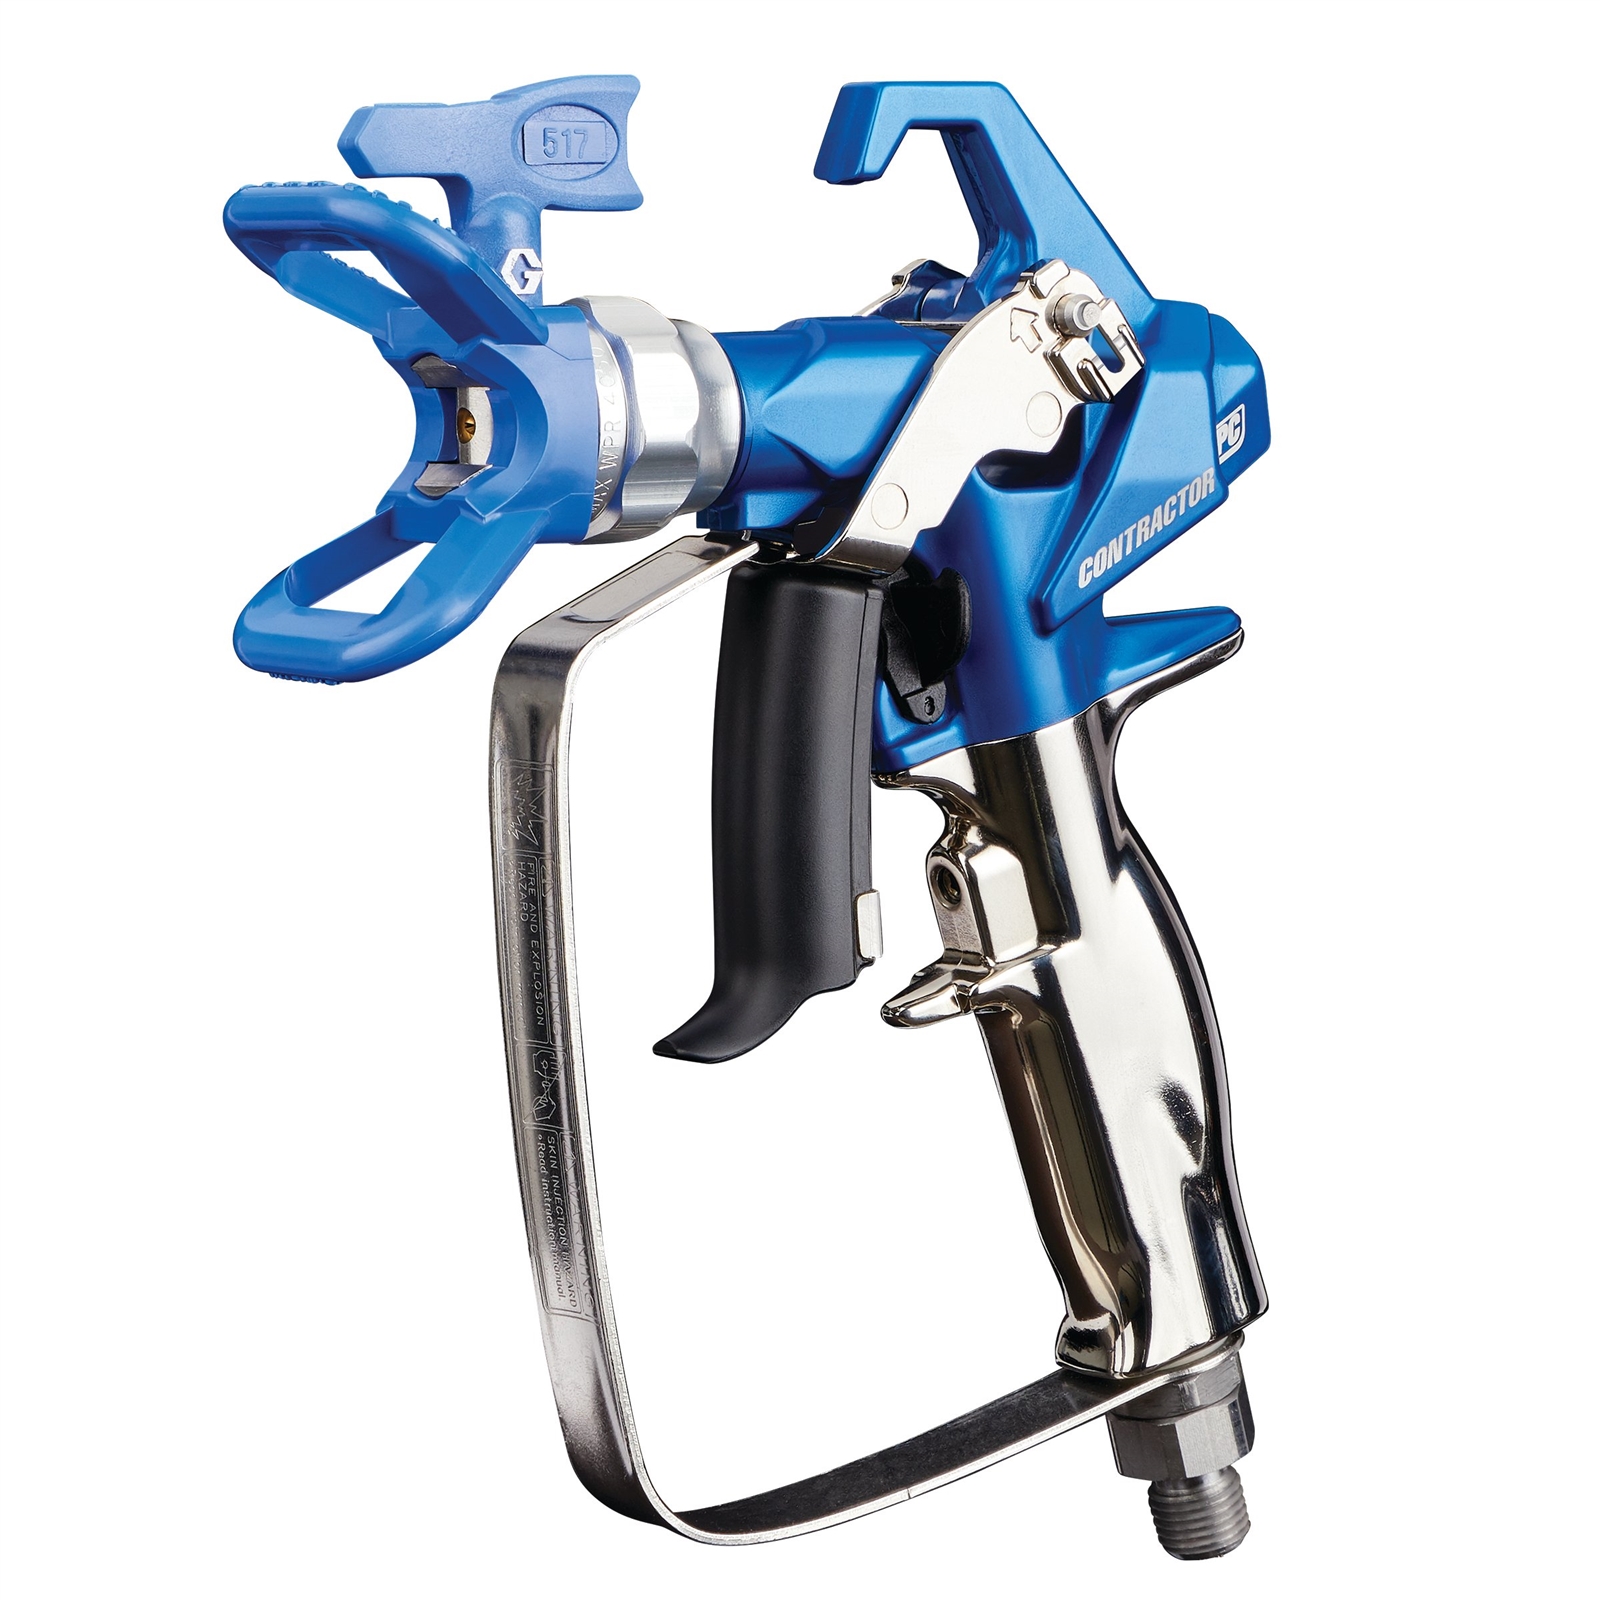 Contractor PC Airless Spray Gun with 